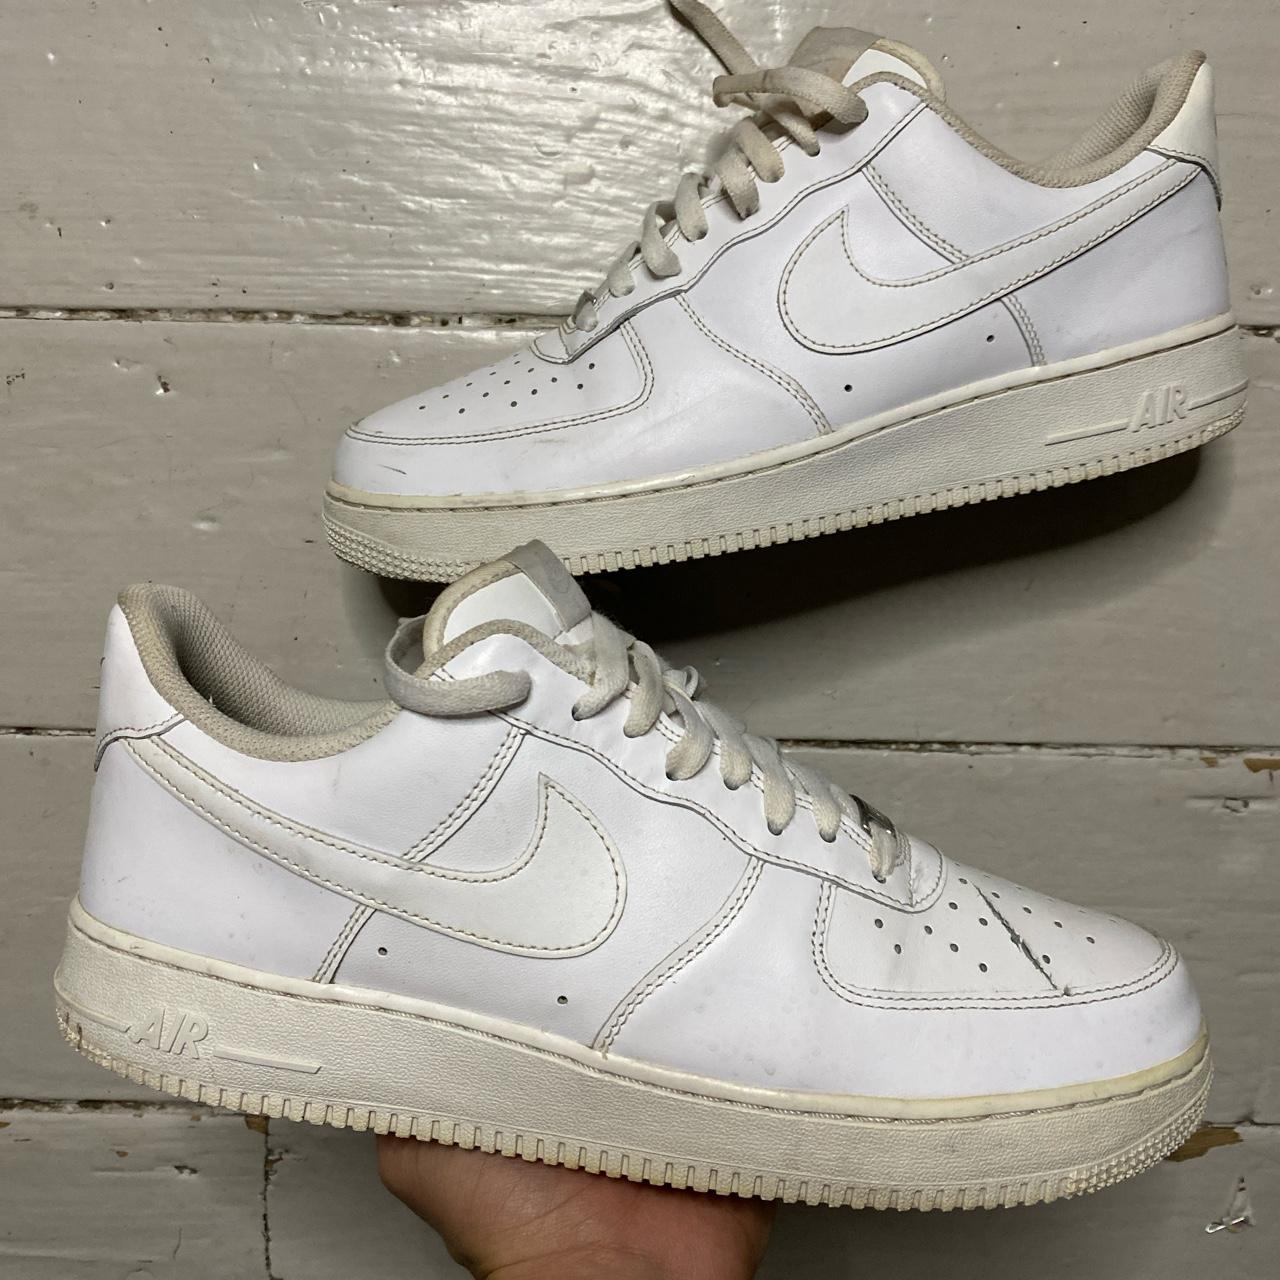 Nike Air Force 1 White 🥶 In good condition just has... - Depop